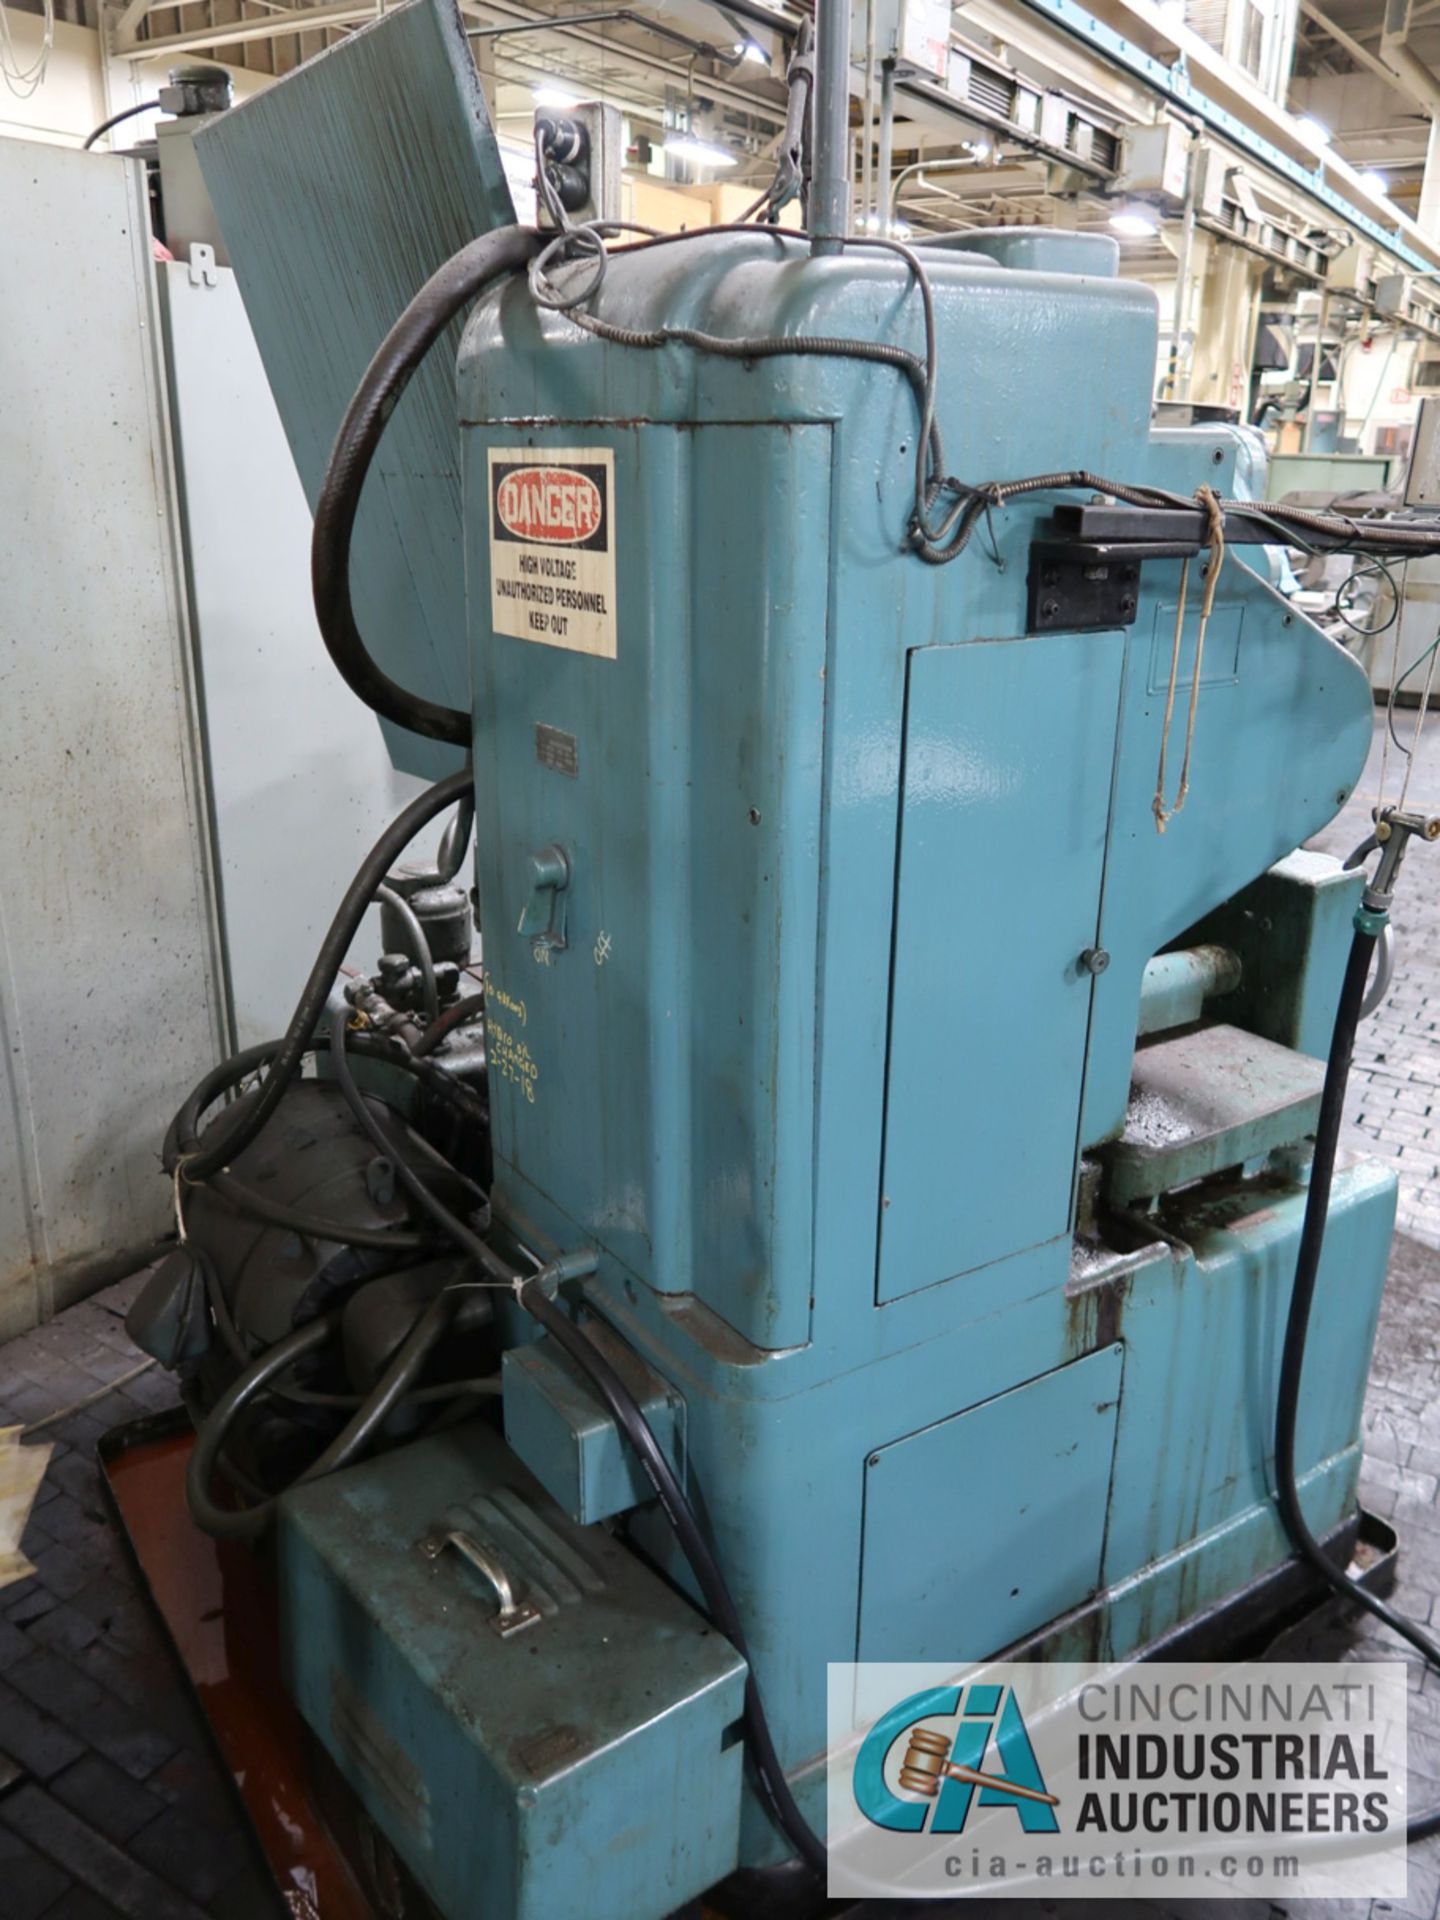 16" HEALD MODEL 261 HORIZONTAL SPINDLE ROTARY SURFACE GRINDER; S/N 30235, 2-AXIS DRO, OS WALKER - Image 3 of 7